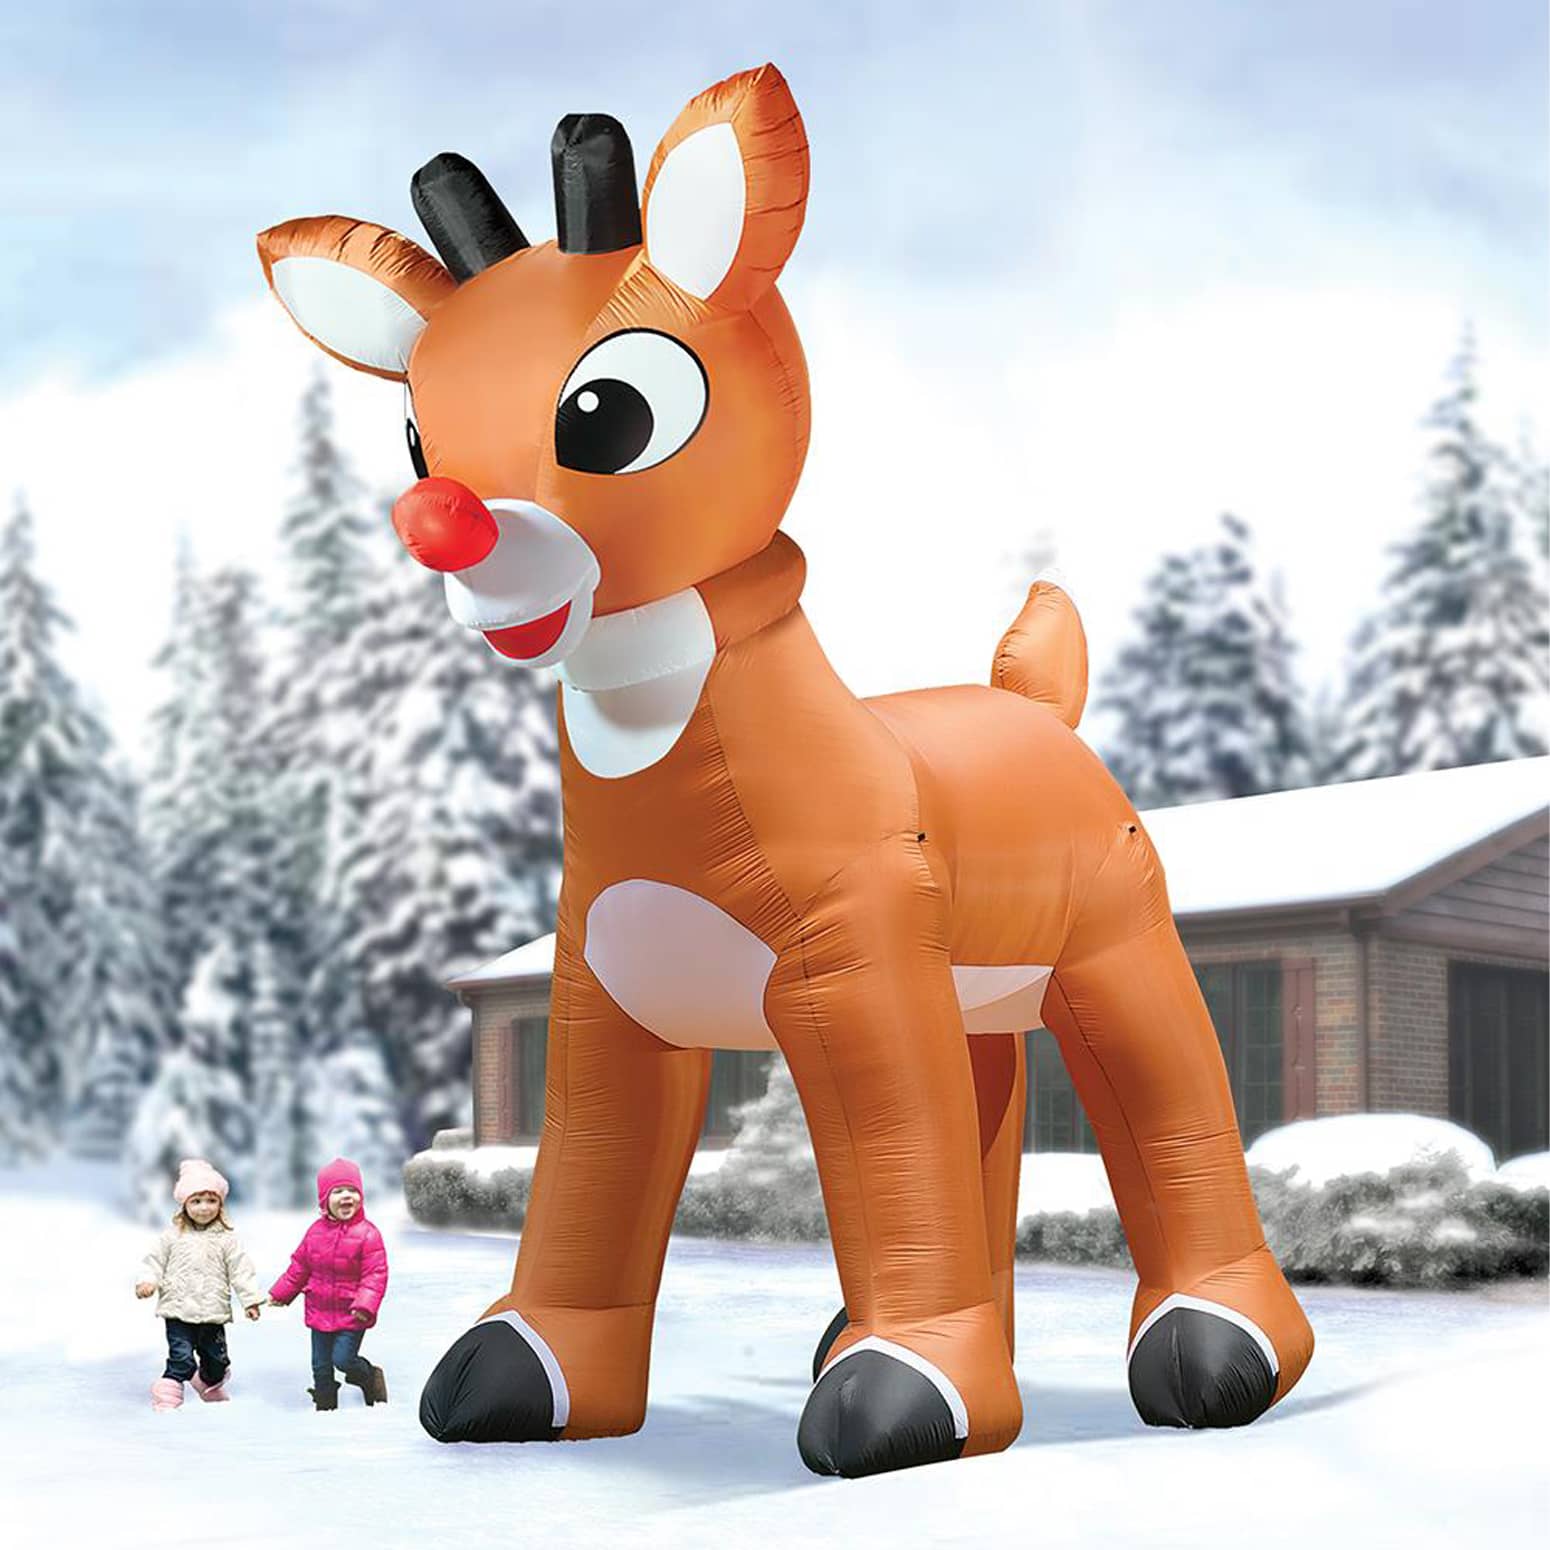 Gigantic 15 Foot Inflatable Rudolph the Red-Nosed Reindeer